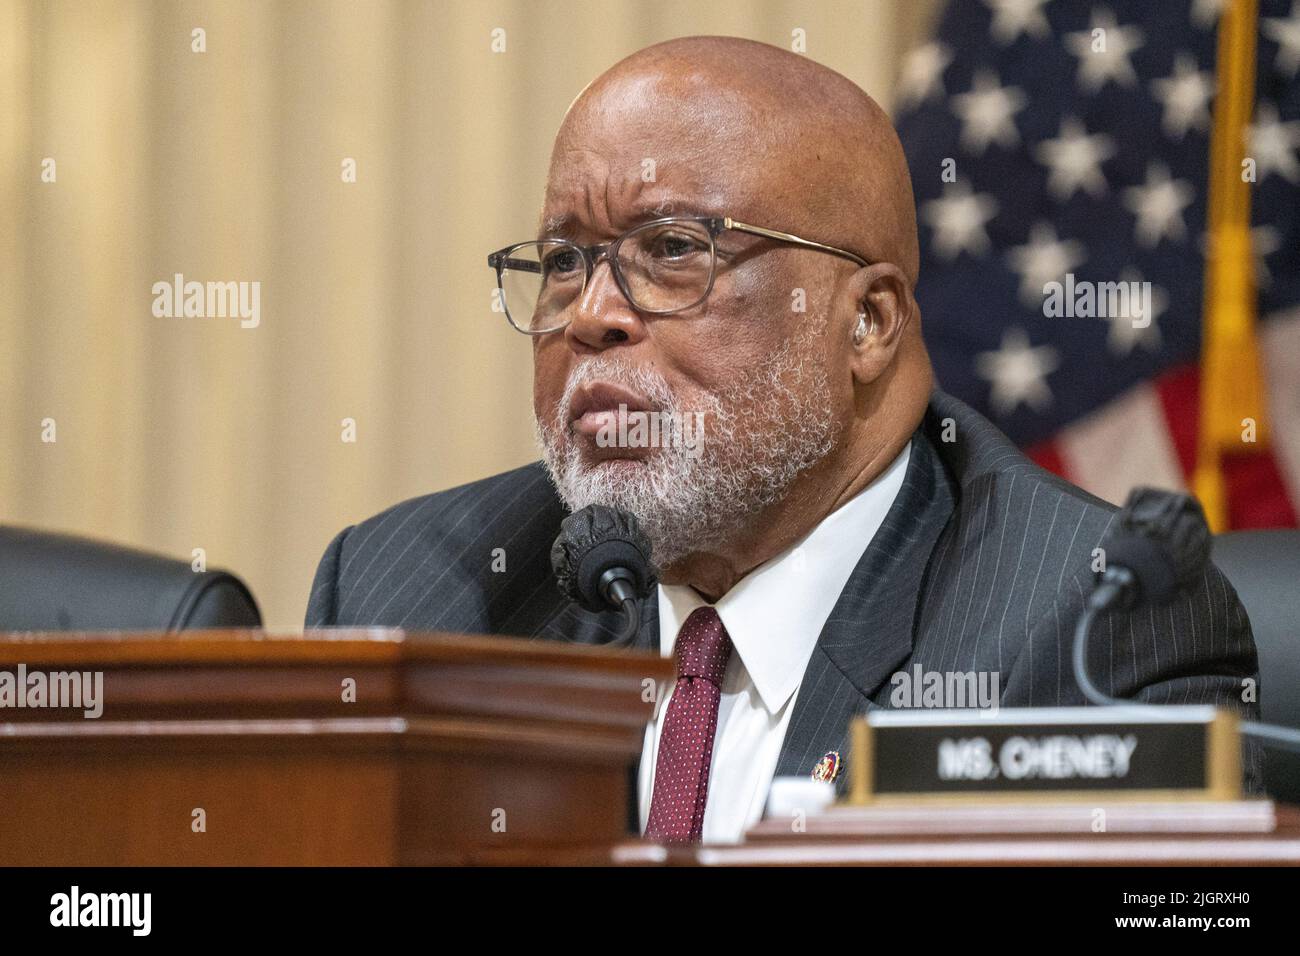 Washington, United States. 12th July, 2022. Committee Chairman Rep. Bennie Thompson, D-MS, speaks during the House select committee investigating the Jan. 6 attack on the U.S. Capitol's seventh public hearing at the U.S. Capitol in Washington, DC on Tuesday, July 12, 2022. Photo by Ken Cedeno/UPI Credit: UPI/Alamy Live News Stock Photo